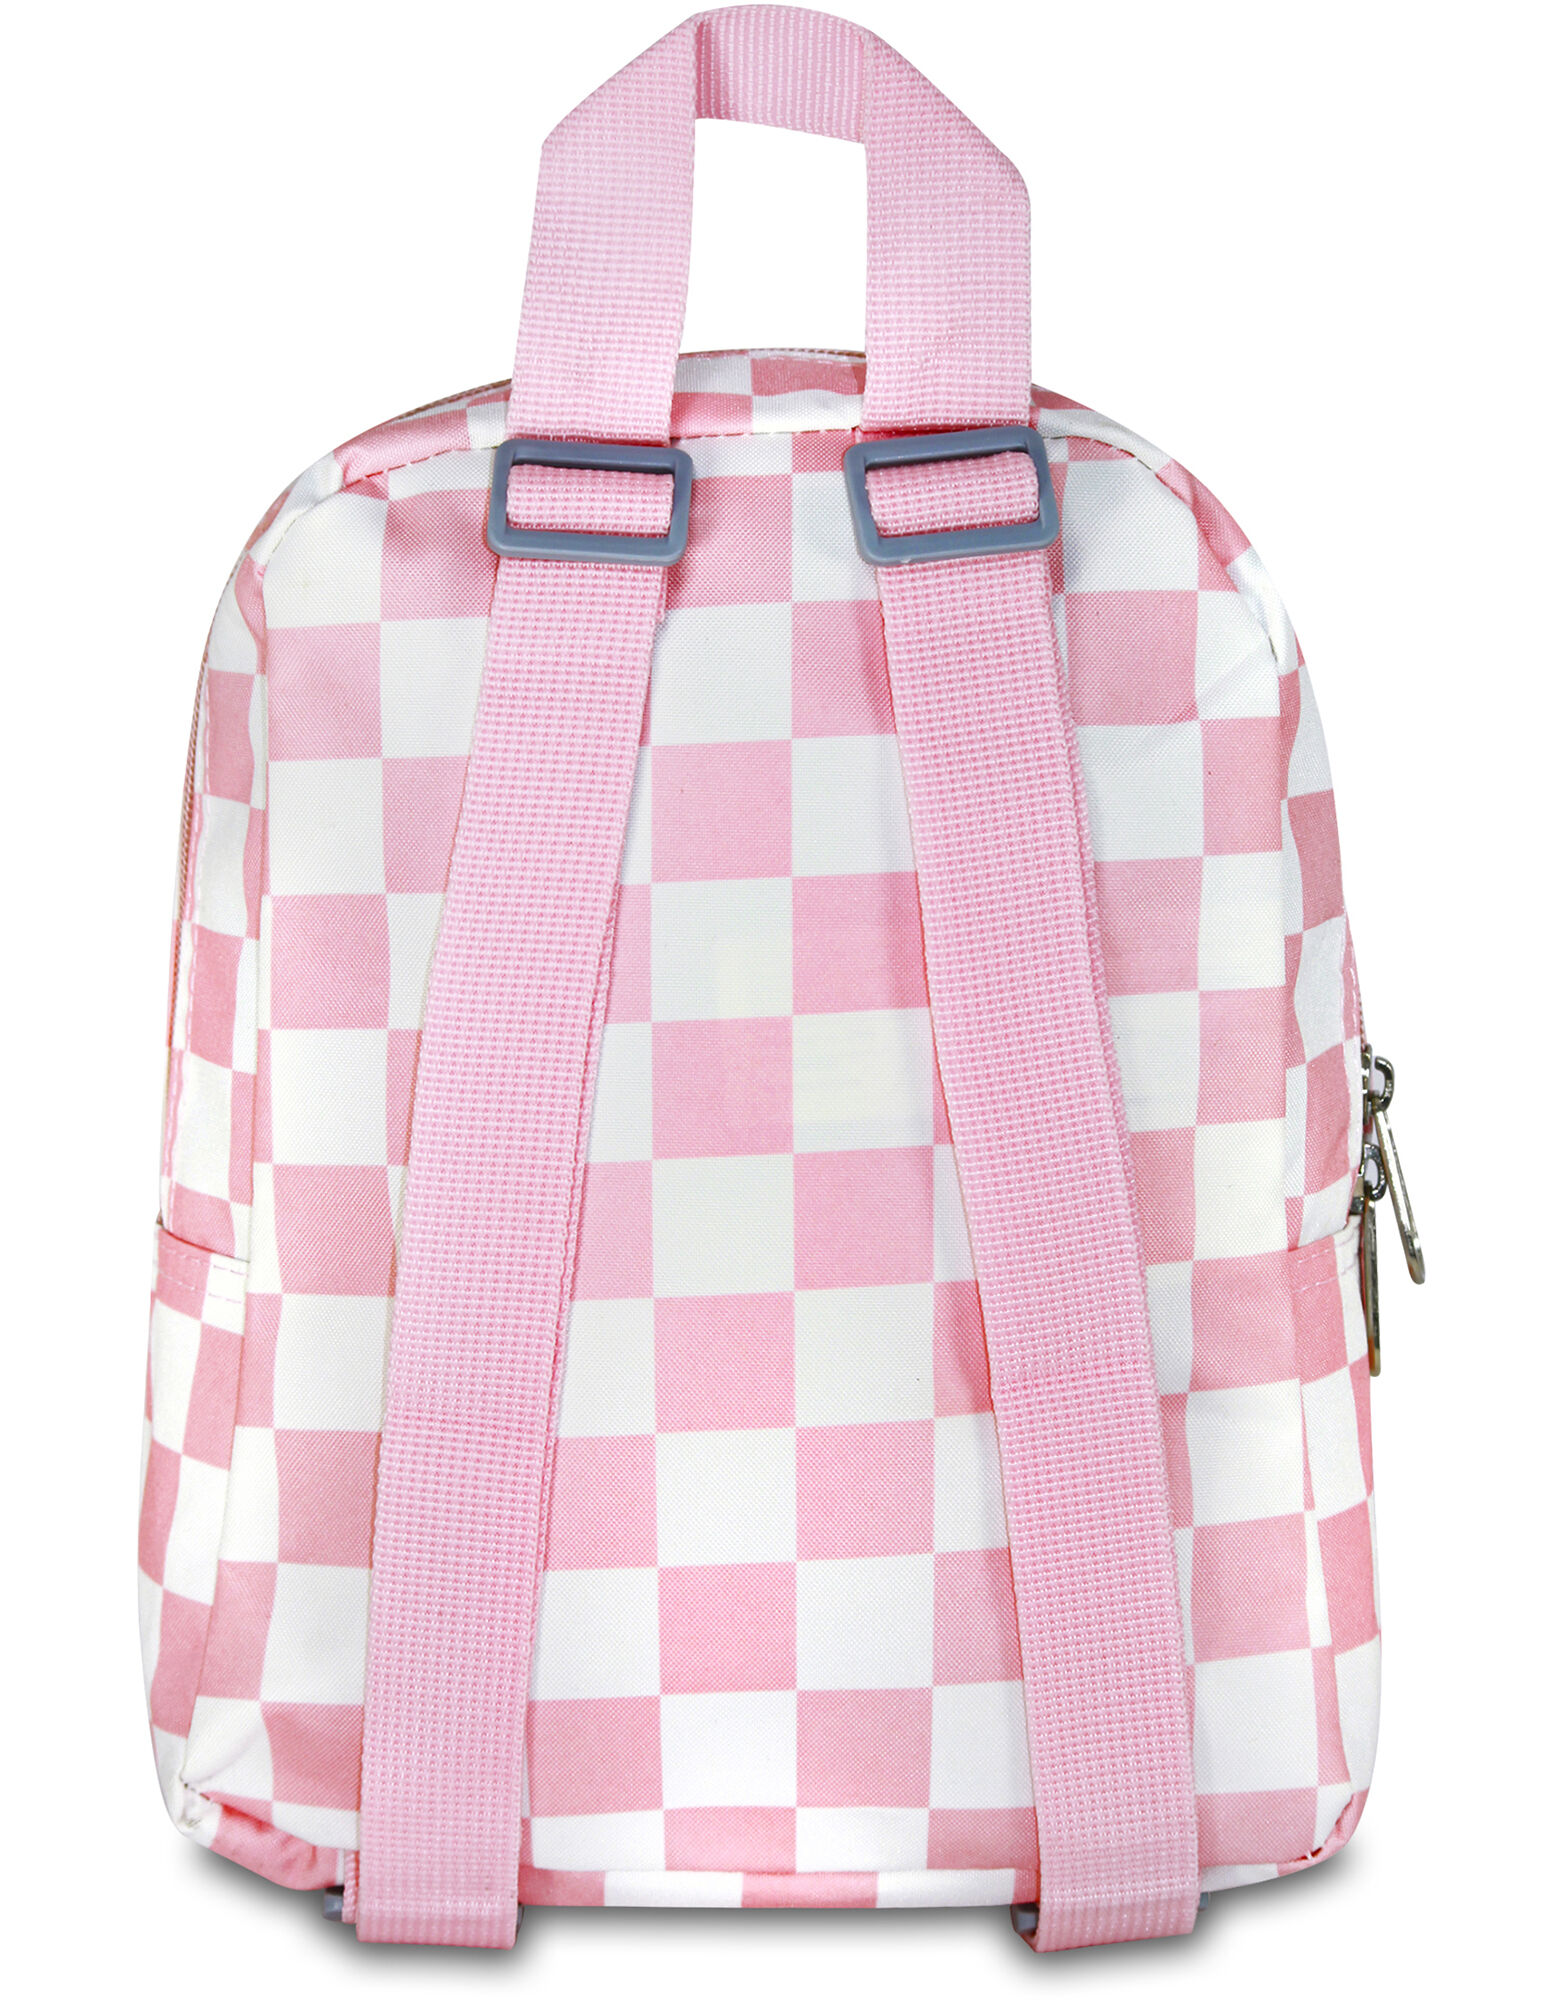 Pink/White Checkered Mini Backpack - Dickies US